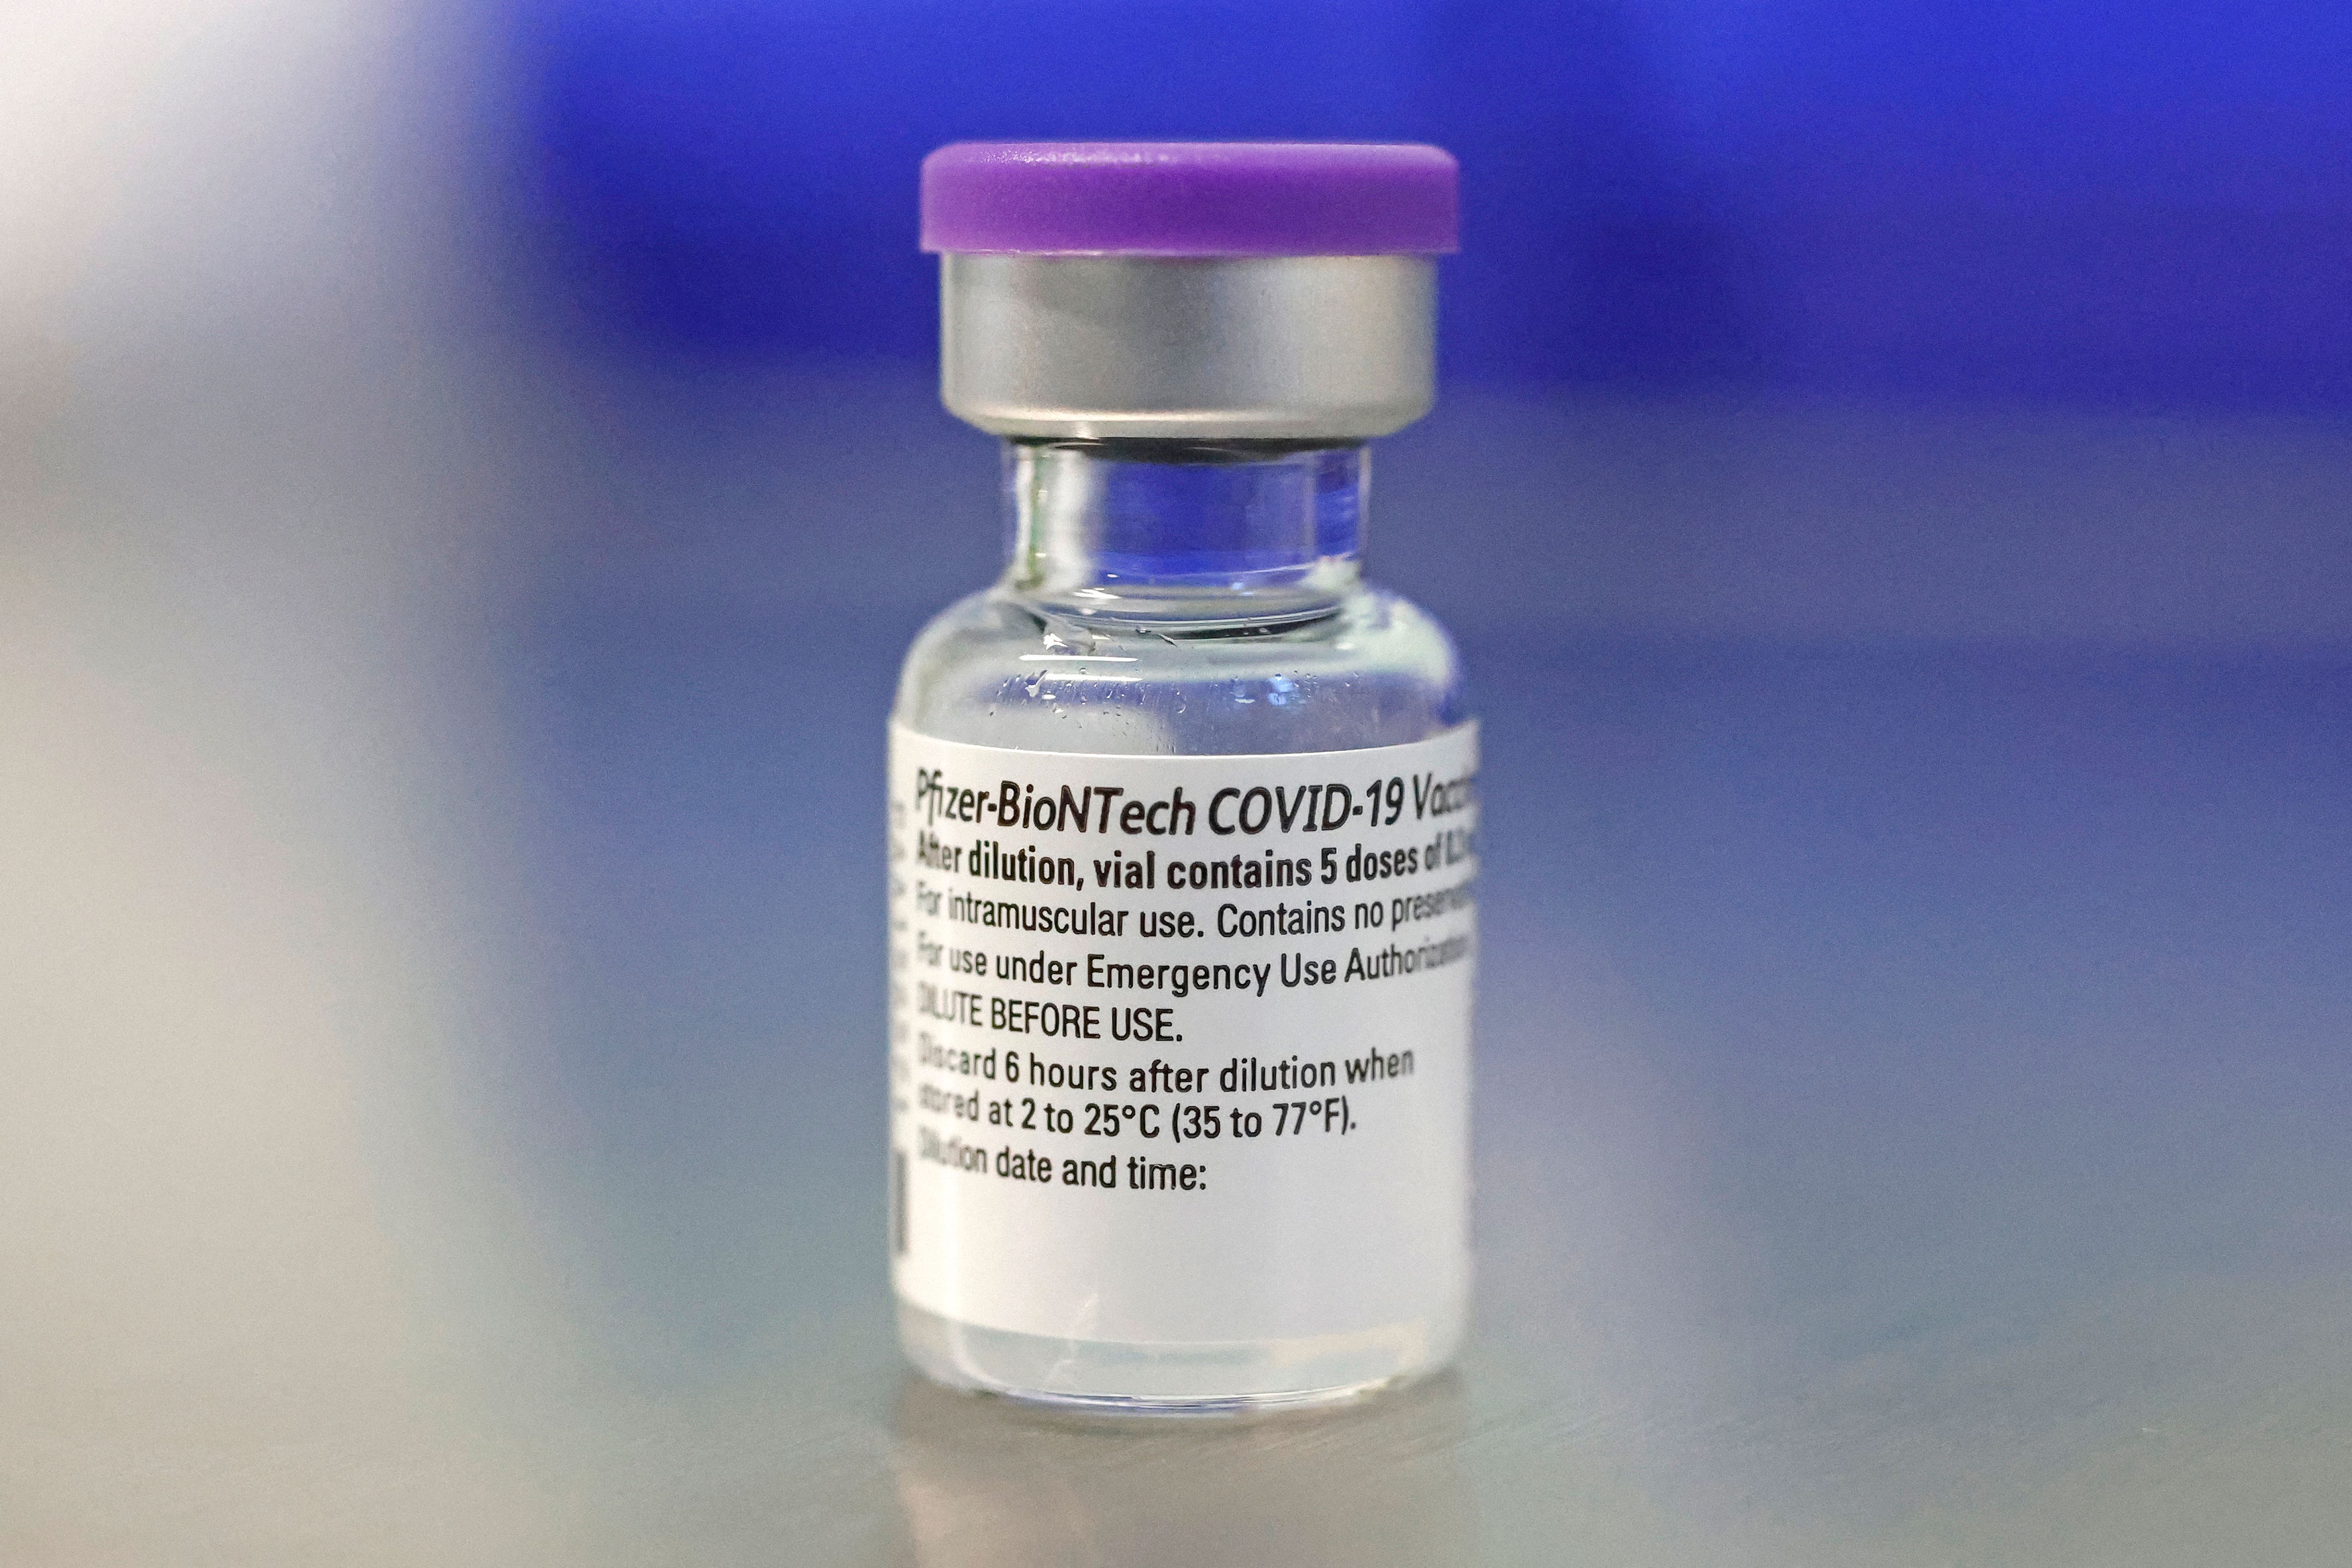 A vial of the Pfizer vaccine against the COVID-19 coronavirus is displayed as medical workers get vaccinated at Sourasky Medical Center (Ichilov) in the Israeli coastal city of Tel Aviv, on December 20, 2020.